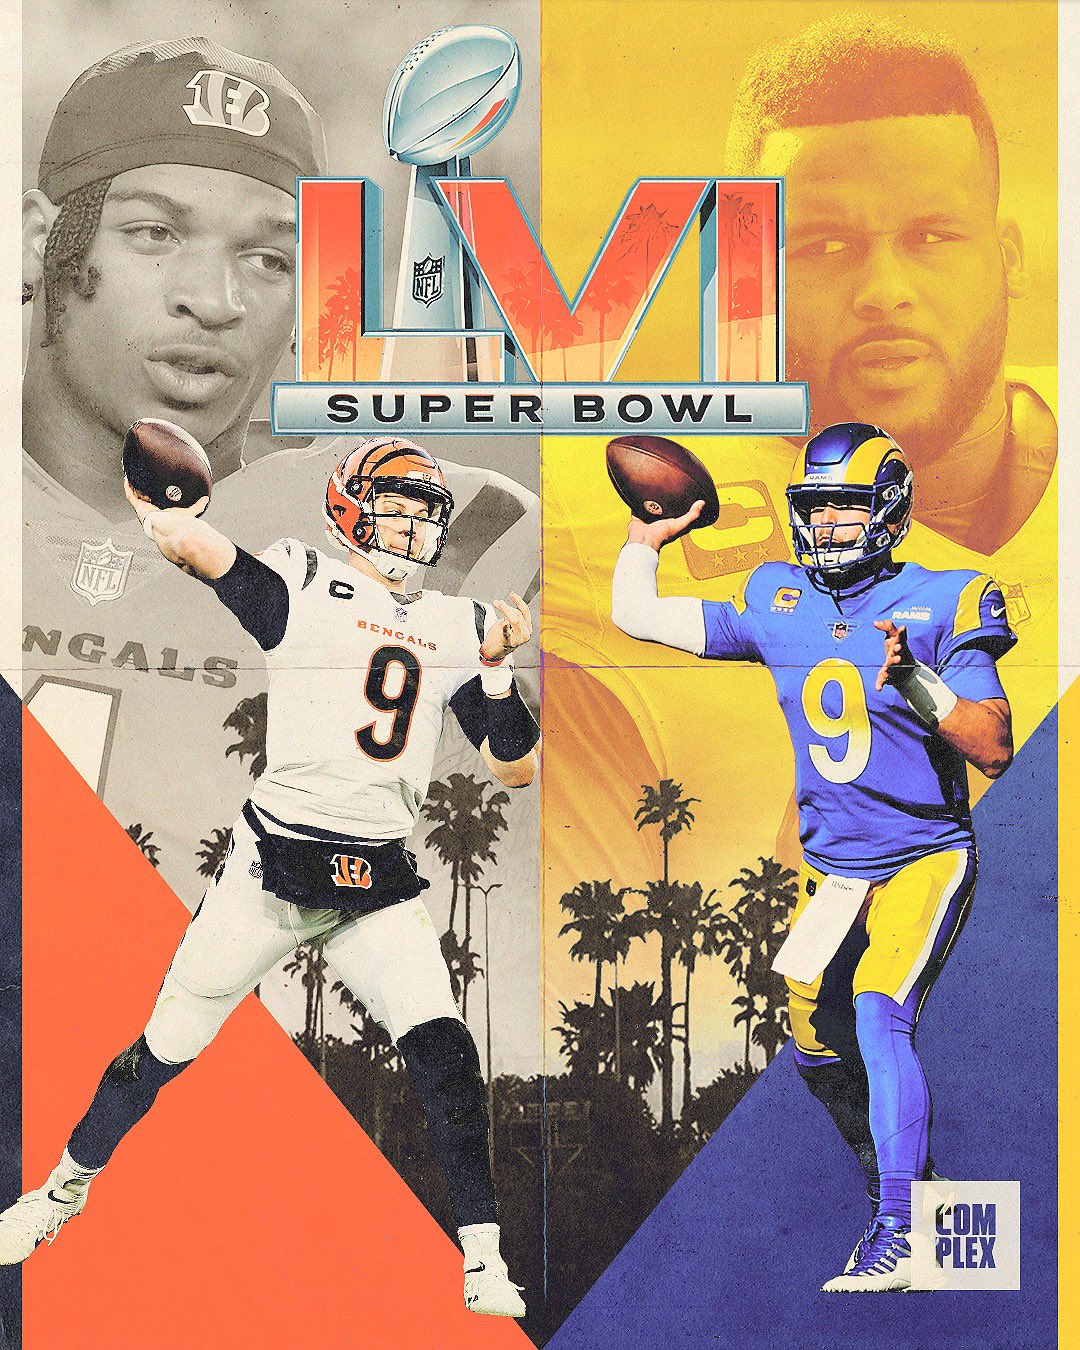 Complex Sports on X: 'RAMS VS. BENGALS IN LA! The Super Bowl is